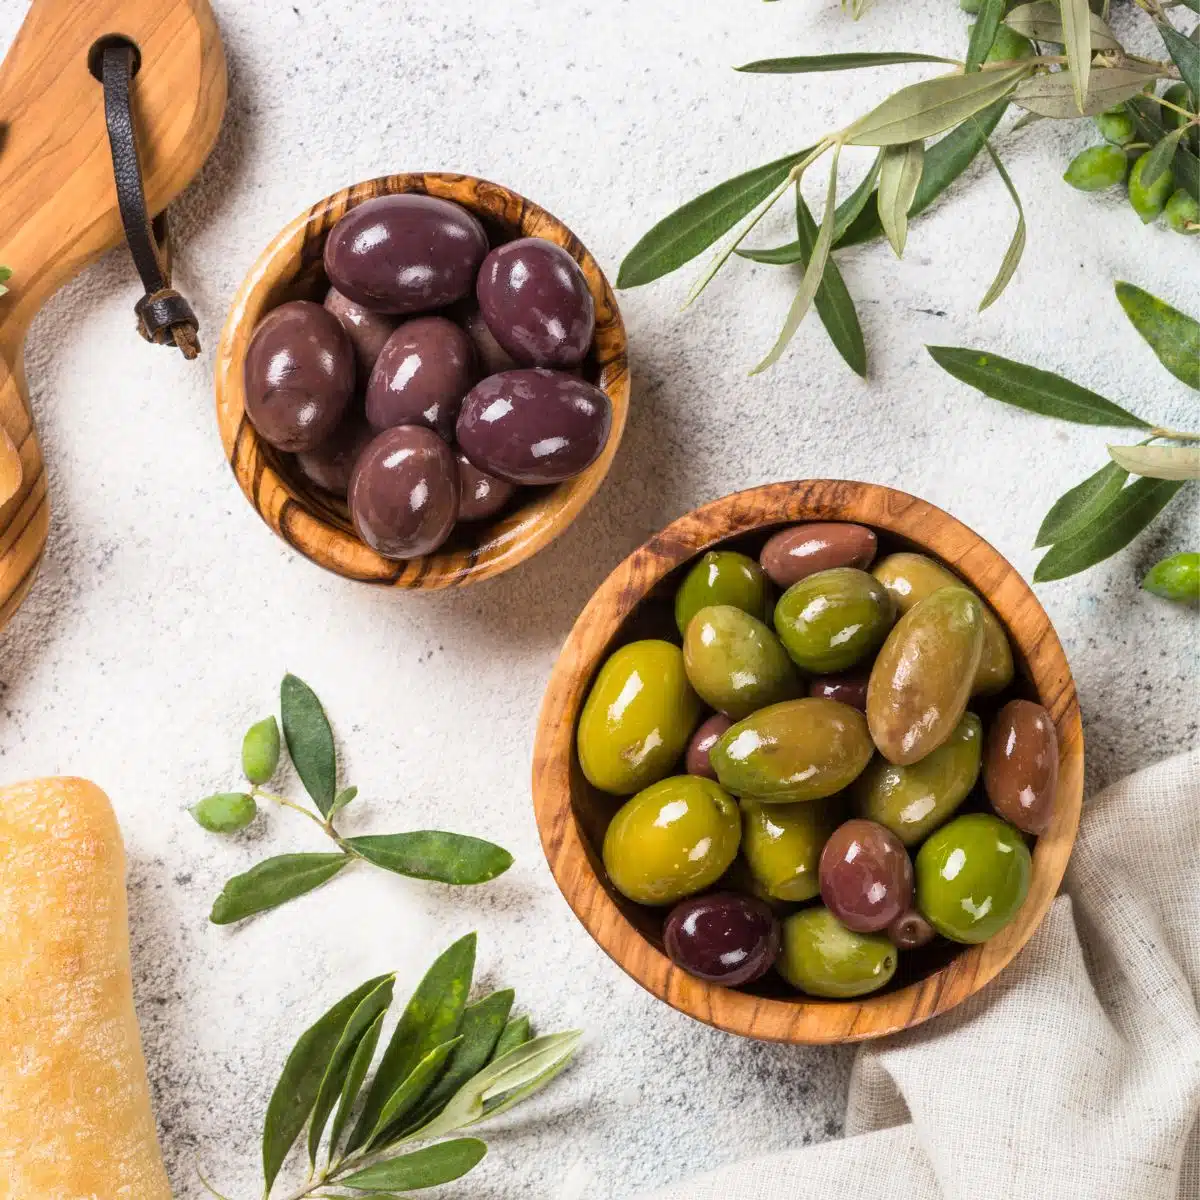 Wooden bowls with olives.